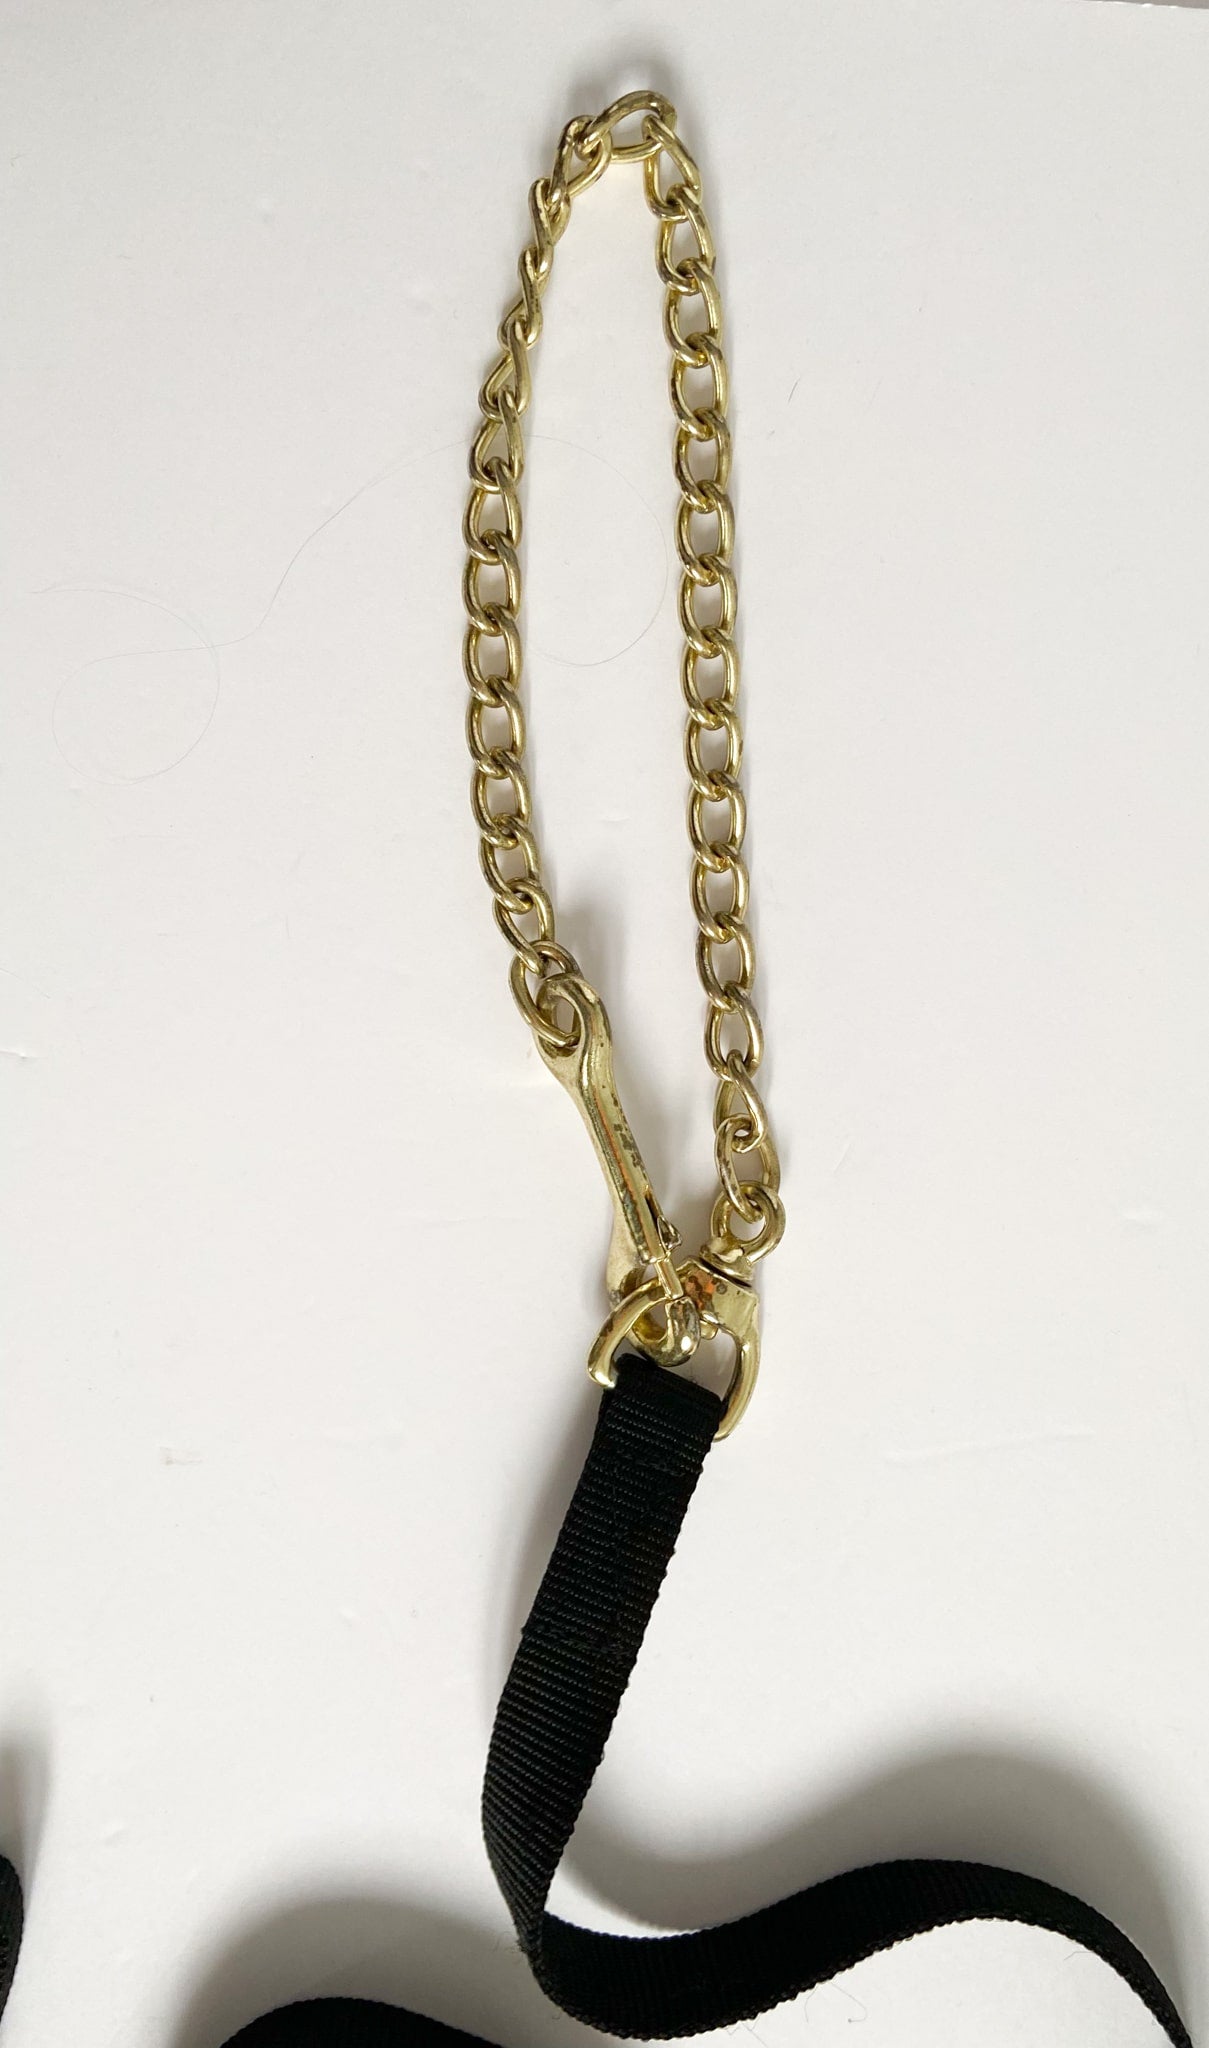 Deluxe Lead with Chain - Black - 6'